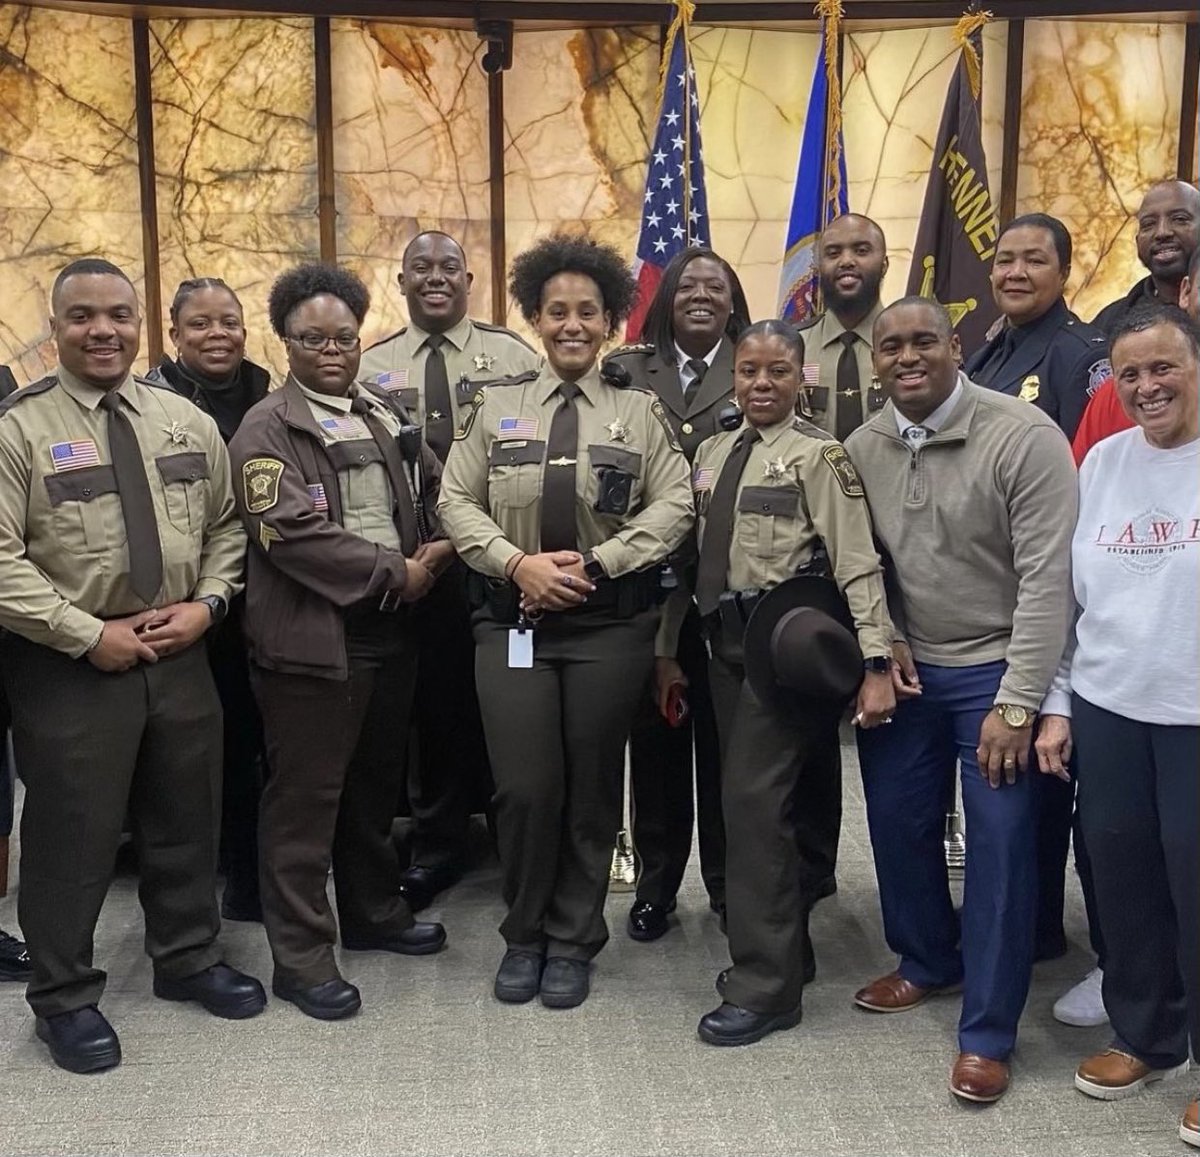 Hey @HennepinSheriff @sheriffwittHCSO if you were taking a picture and said I only want white people in this shot, would there be some controversy?  #stribpol #MNmedia